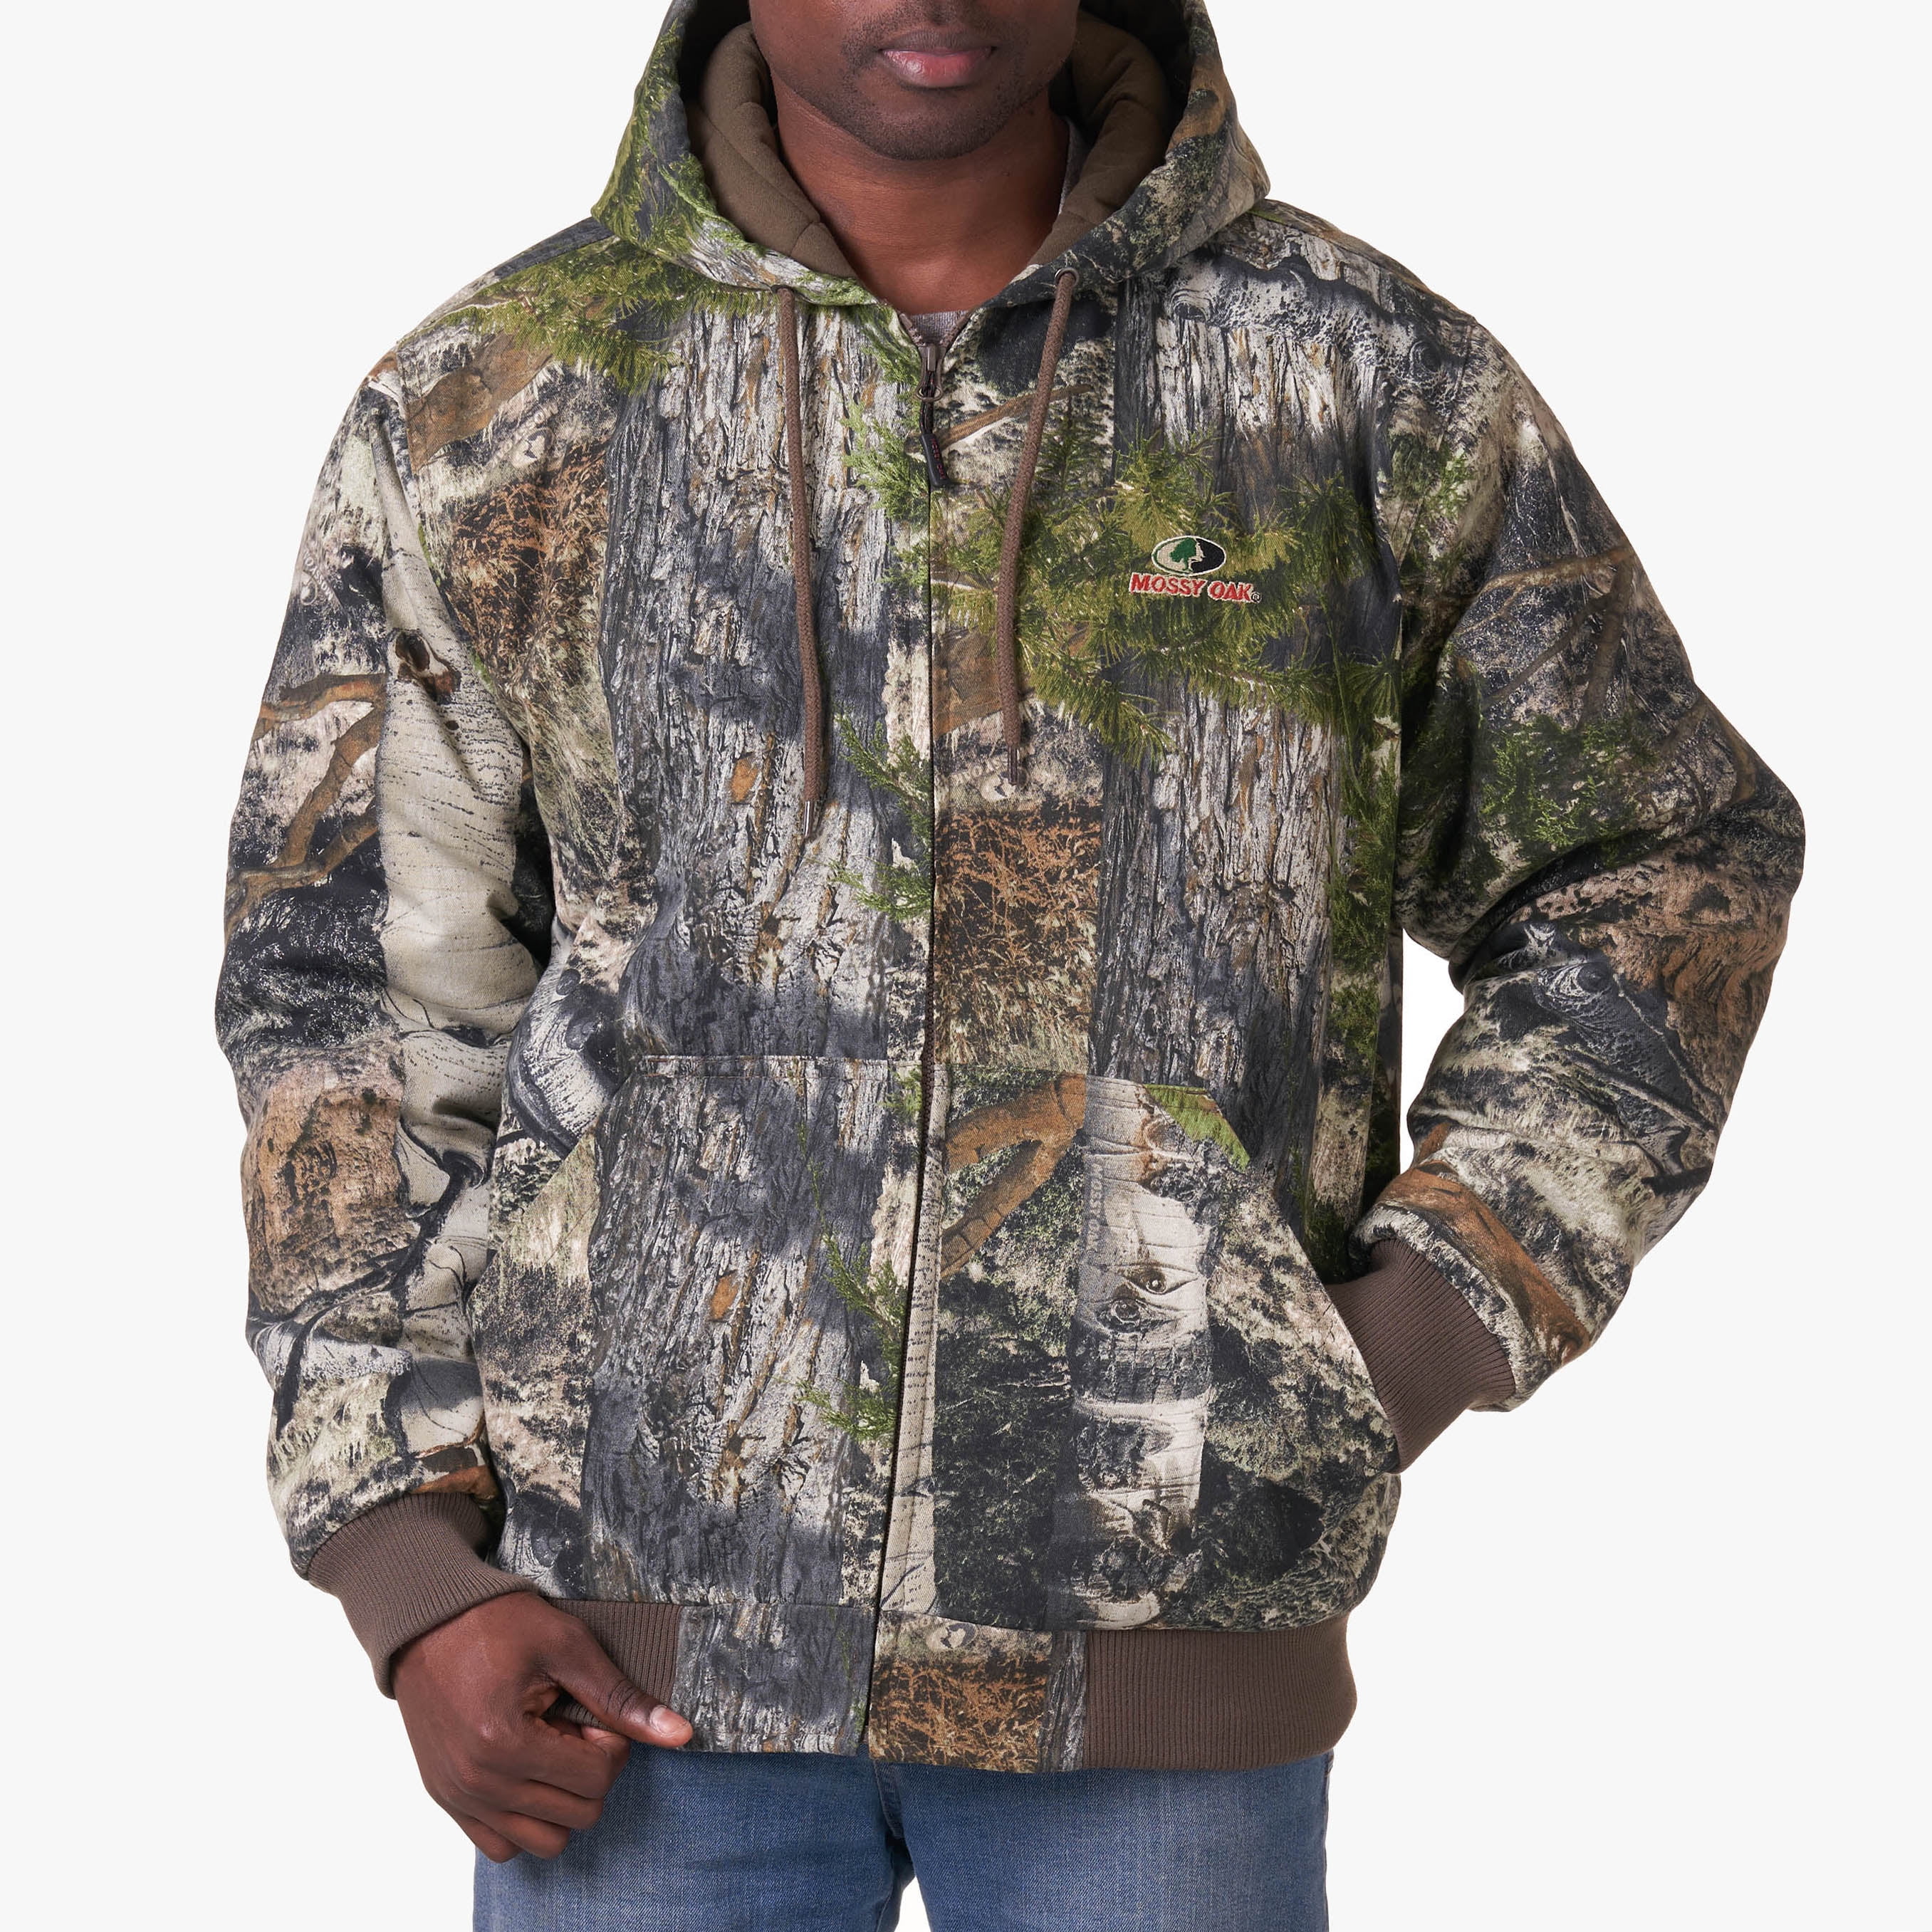 XL 2XL or 3XL Large Men's Mossy Oak Mountain County Insulated Bomber Jacket M 